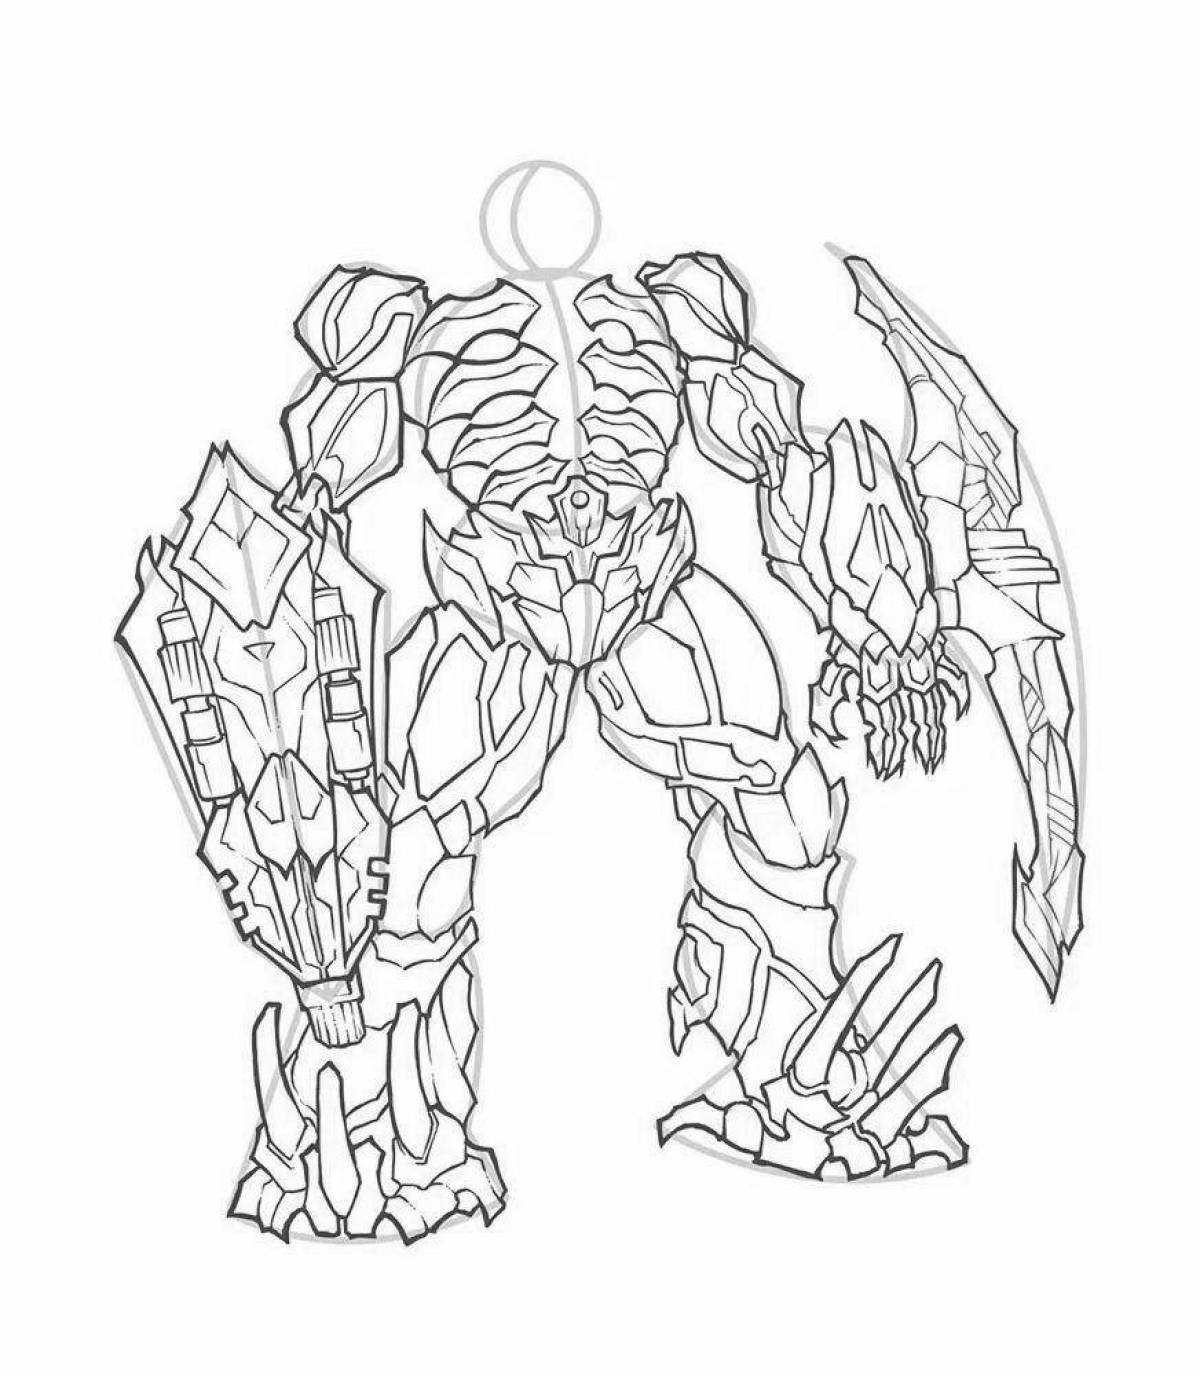 Shiny shockwave transformers coloring book